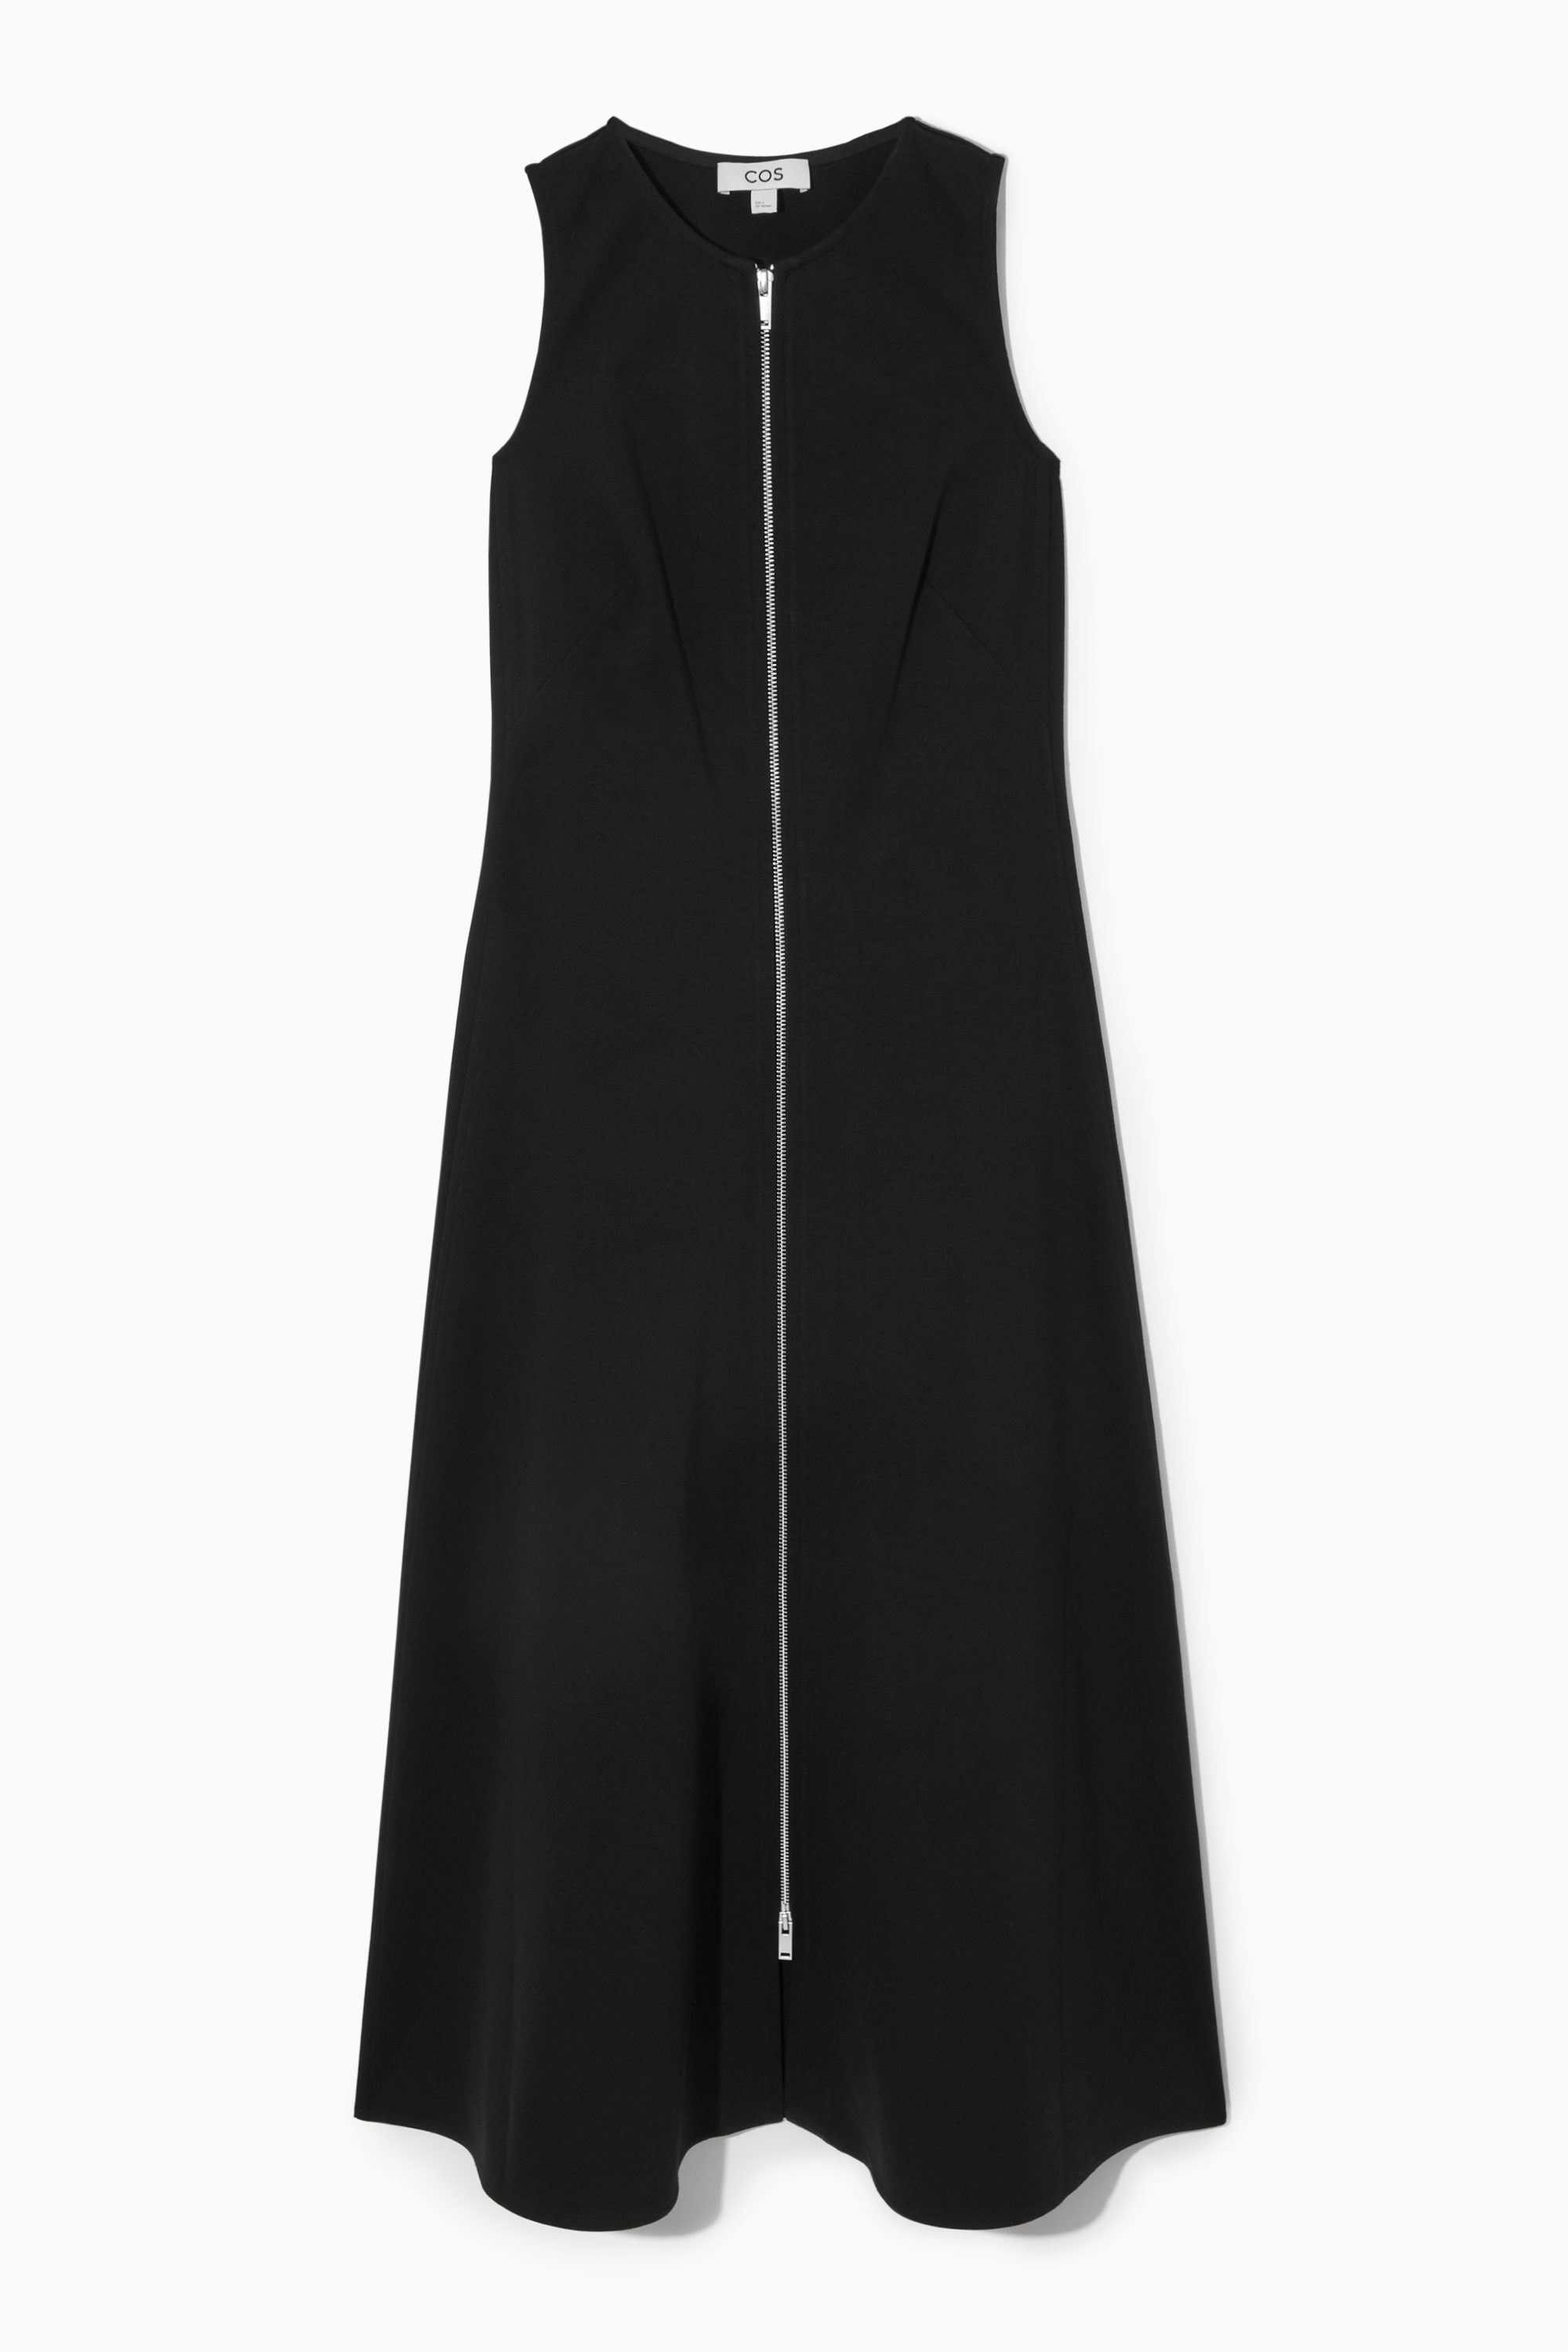 COS Gathered Midi Dress in OFF-WHITE